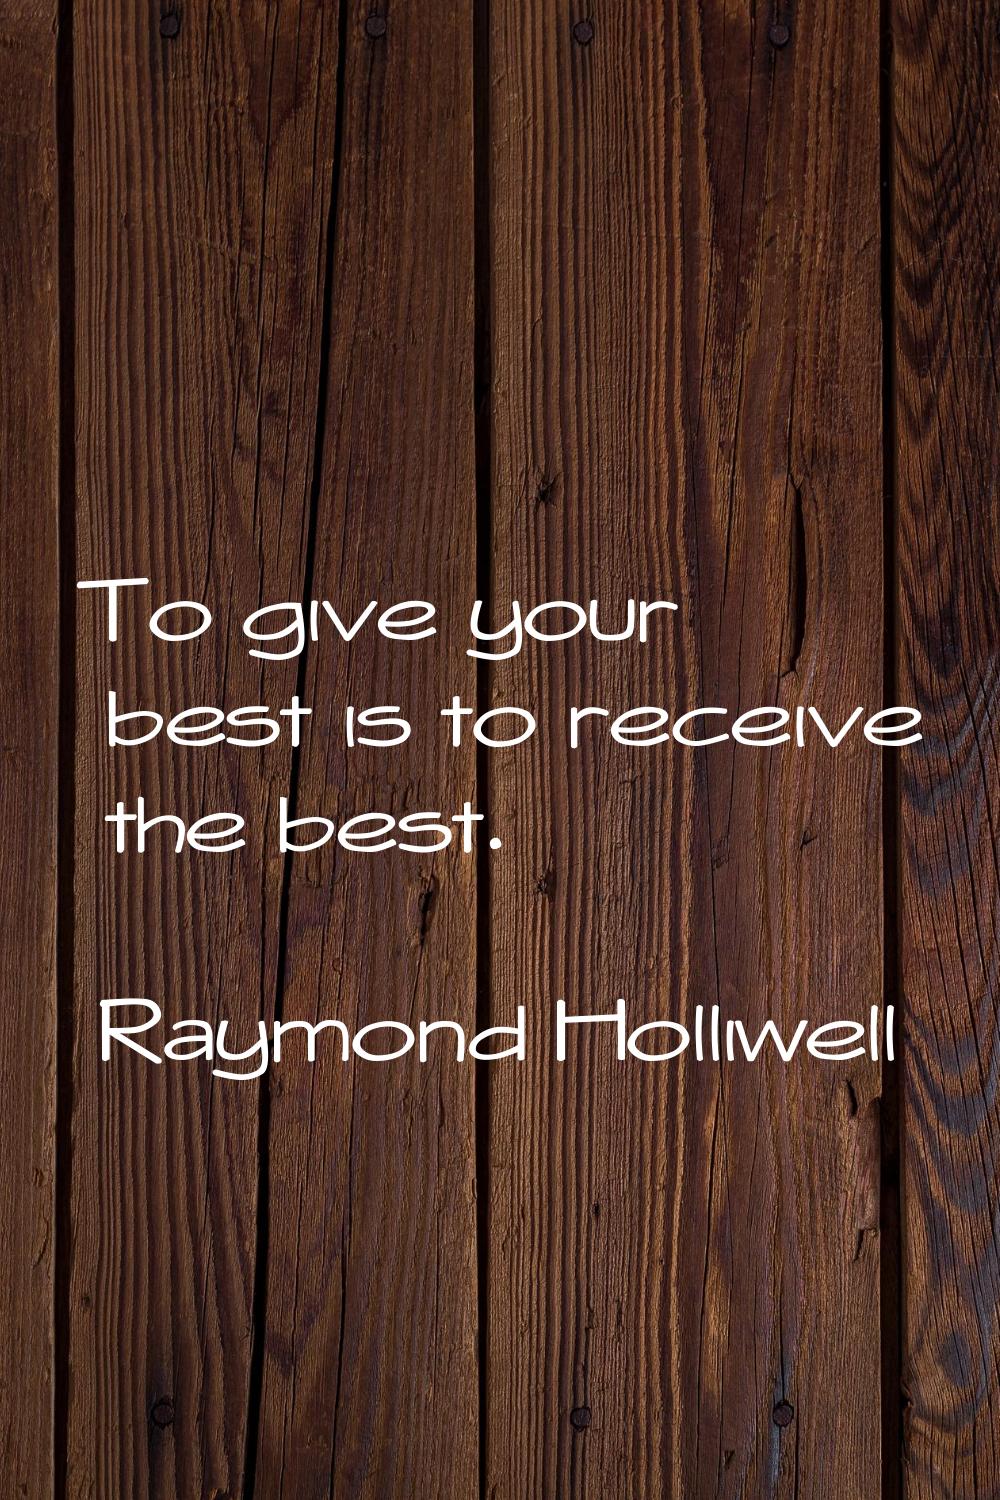 To give your best is to receive the best.